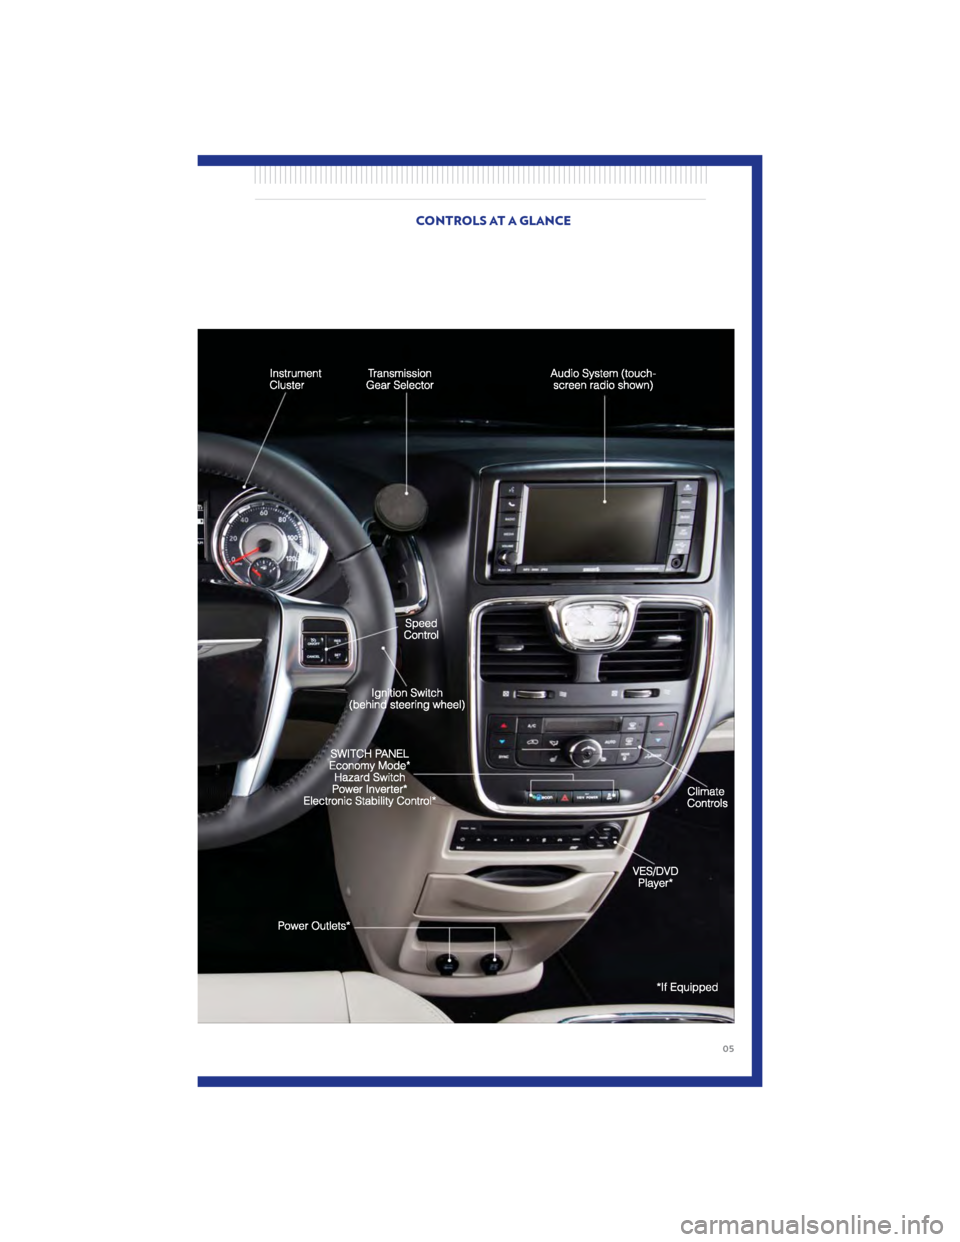 CHRYSLER TOWN AND COUNTRY 2011 5.G User Guide CONTROLS AT A GLANCE
05 